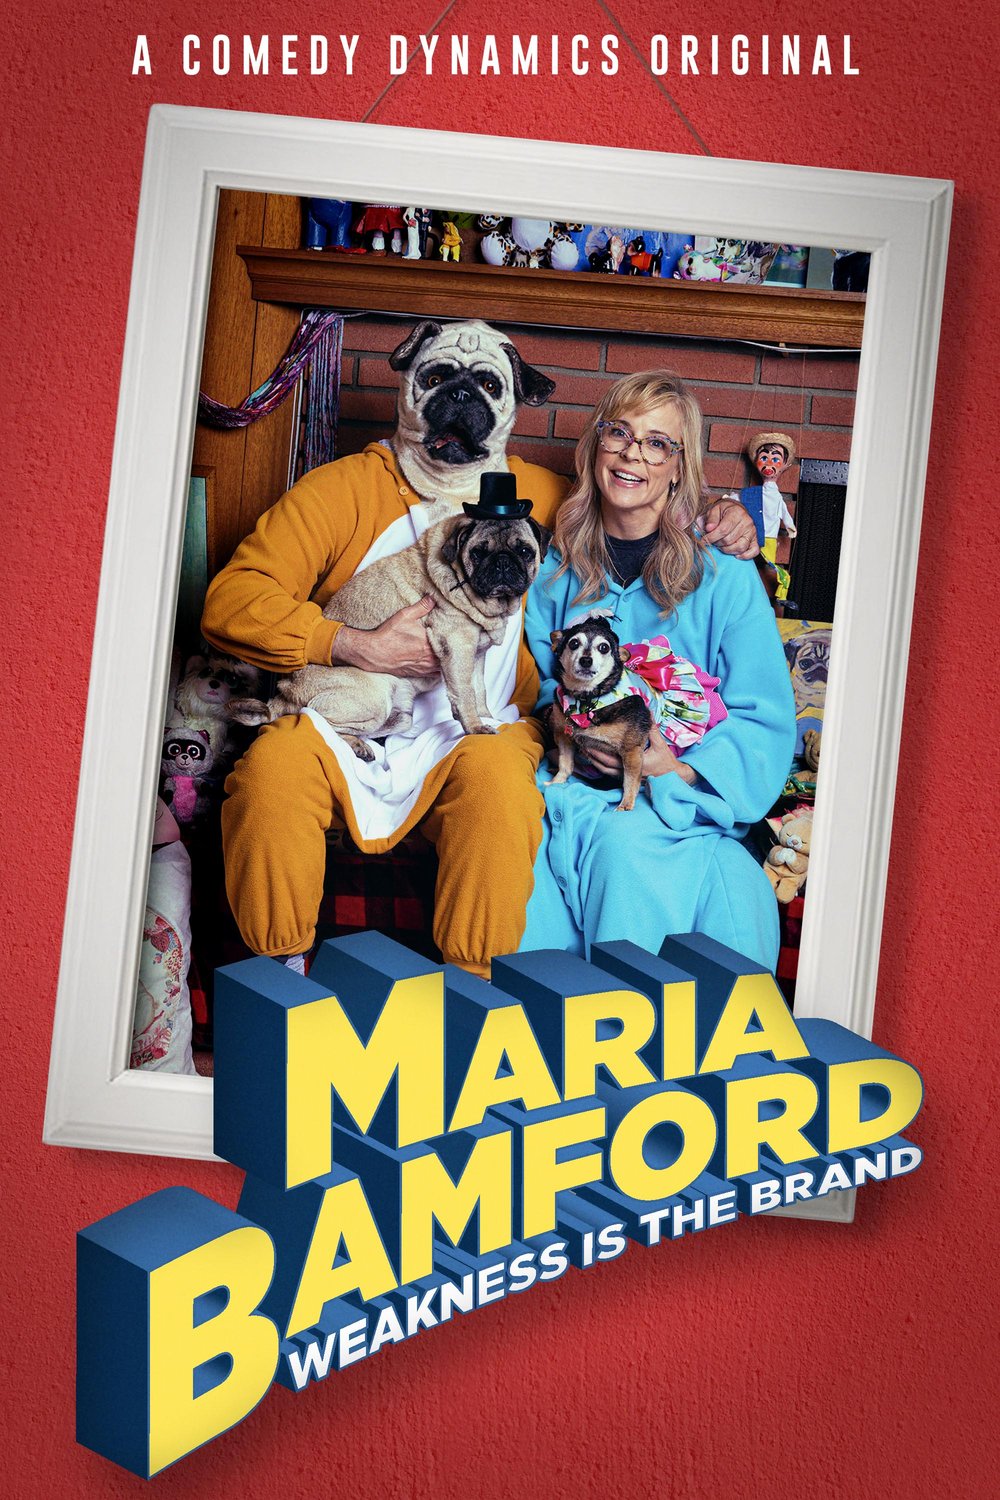 Poster of the movie Maria Bamford: Weakness Is the Brand